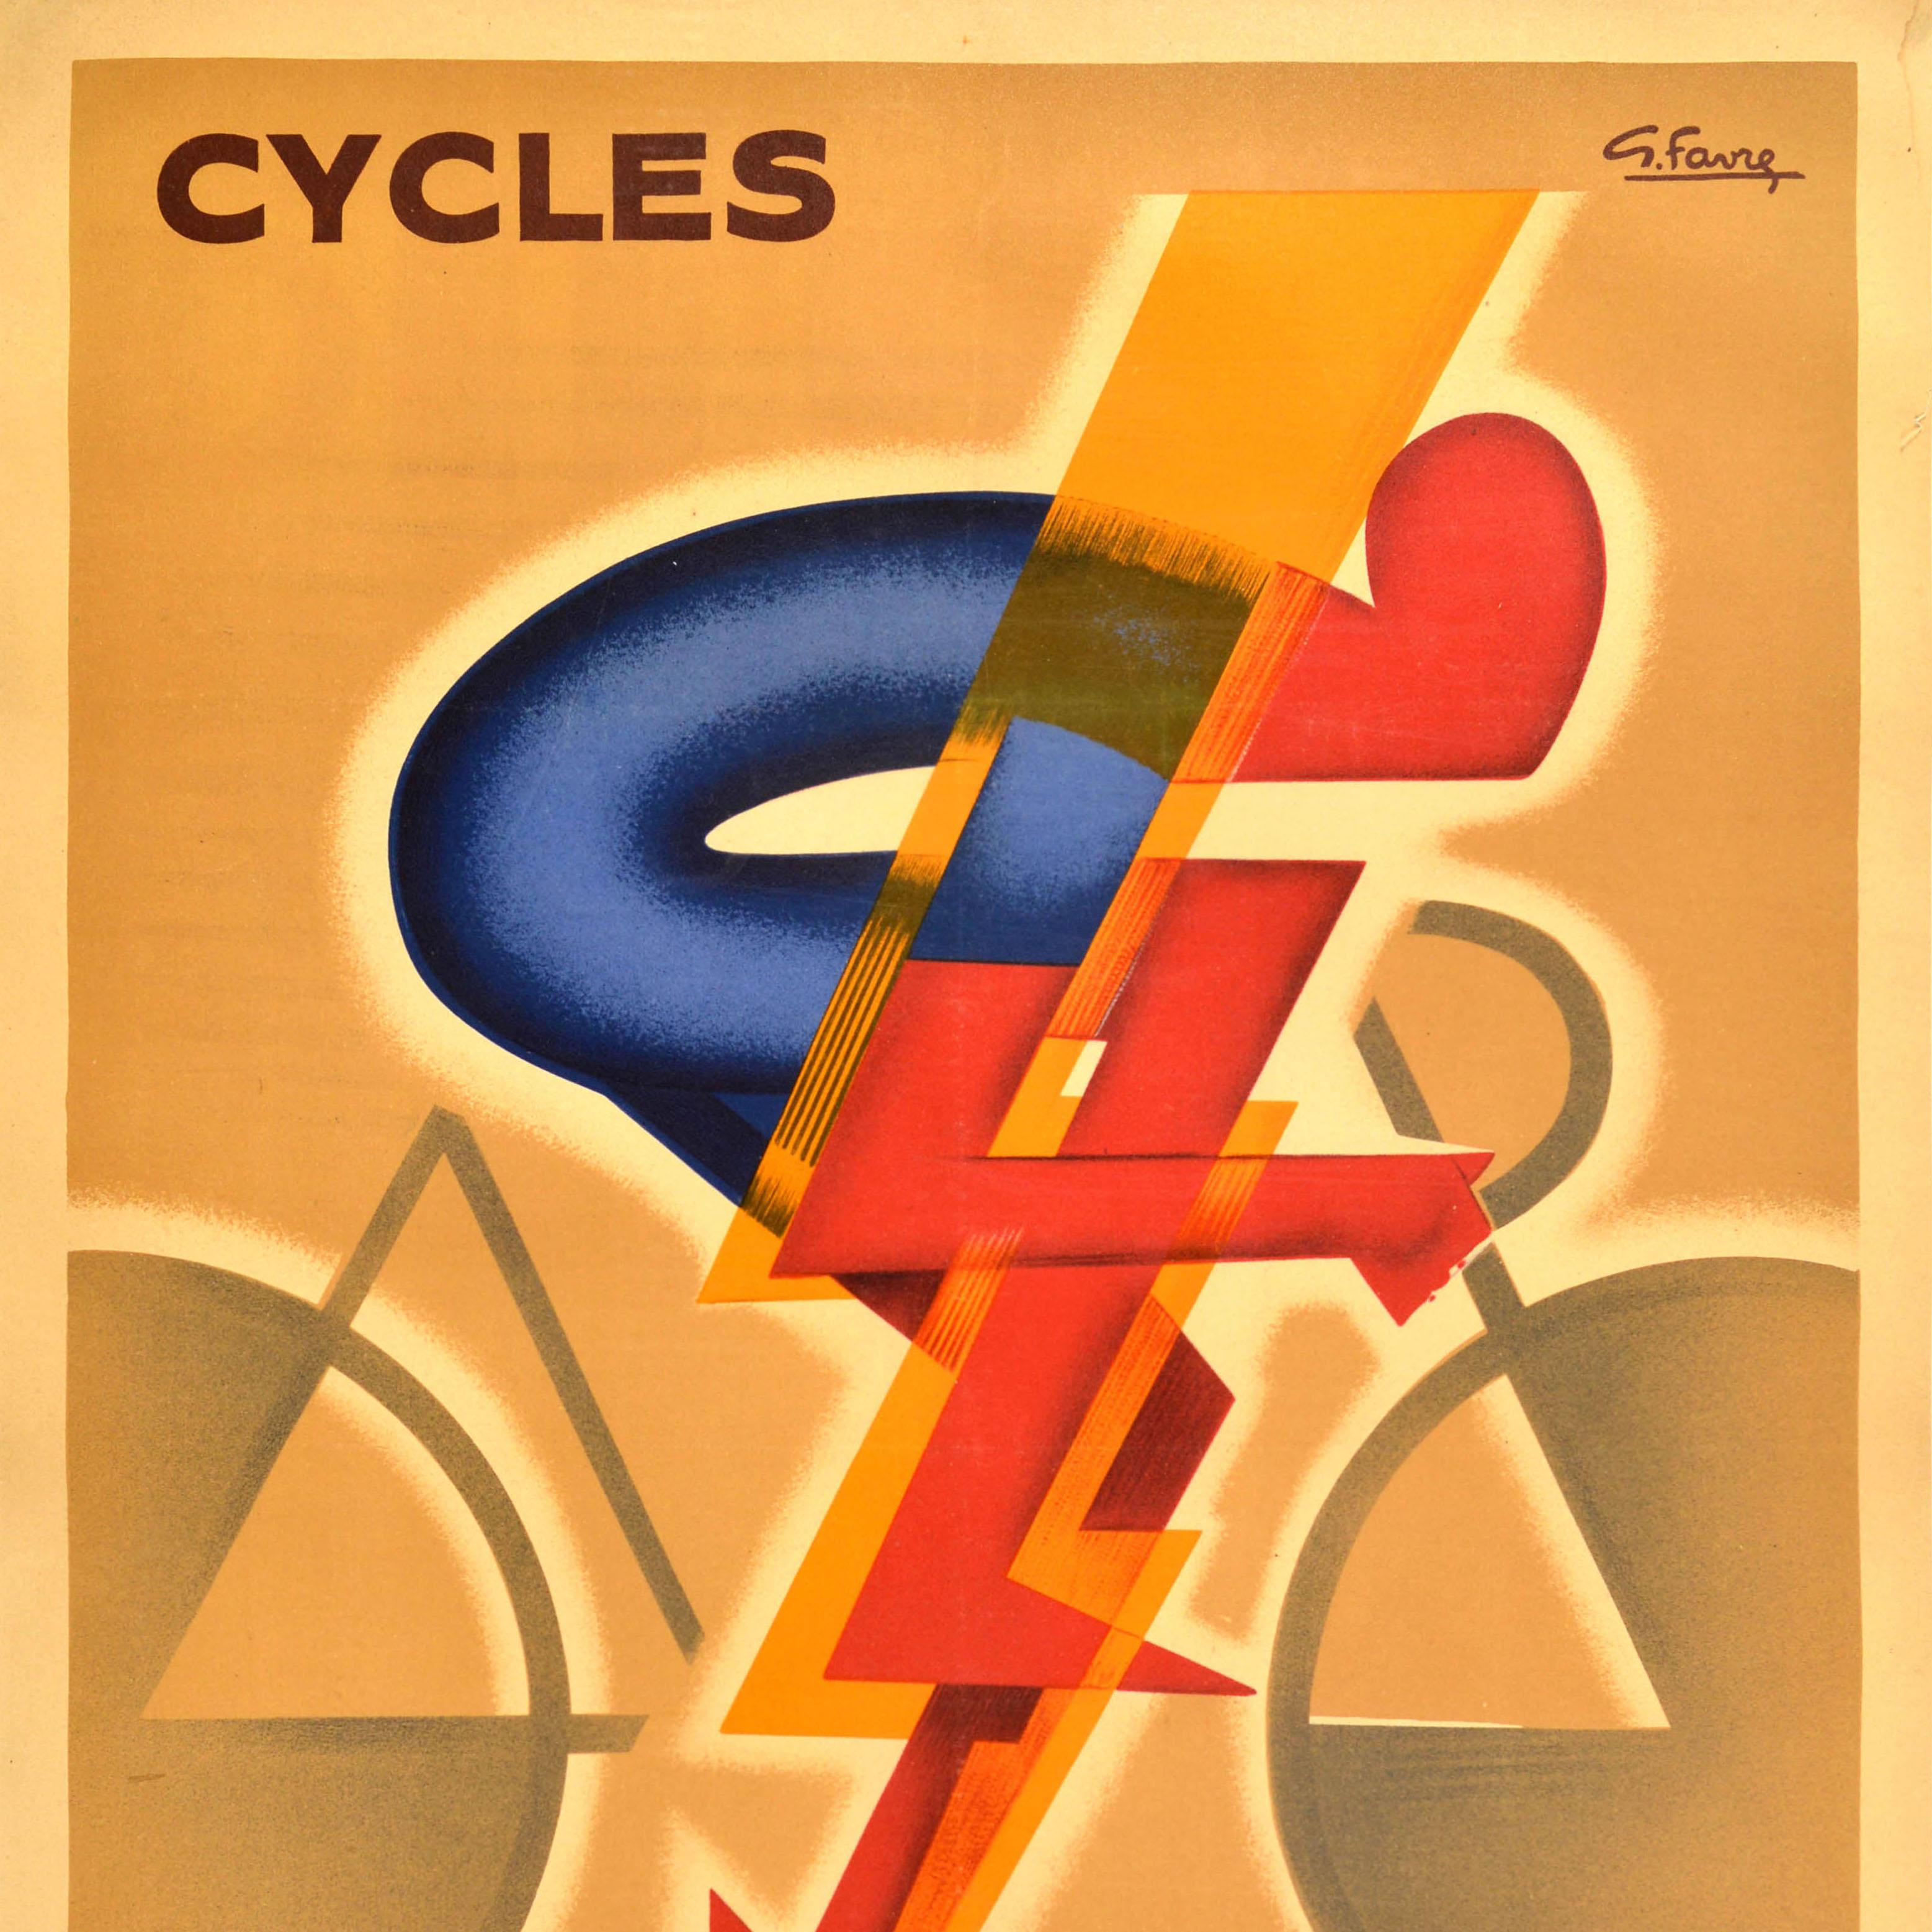 Original Antique Advertising Poster Cycles Dilecta Georges Favre Art Deco Design For Sale 2